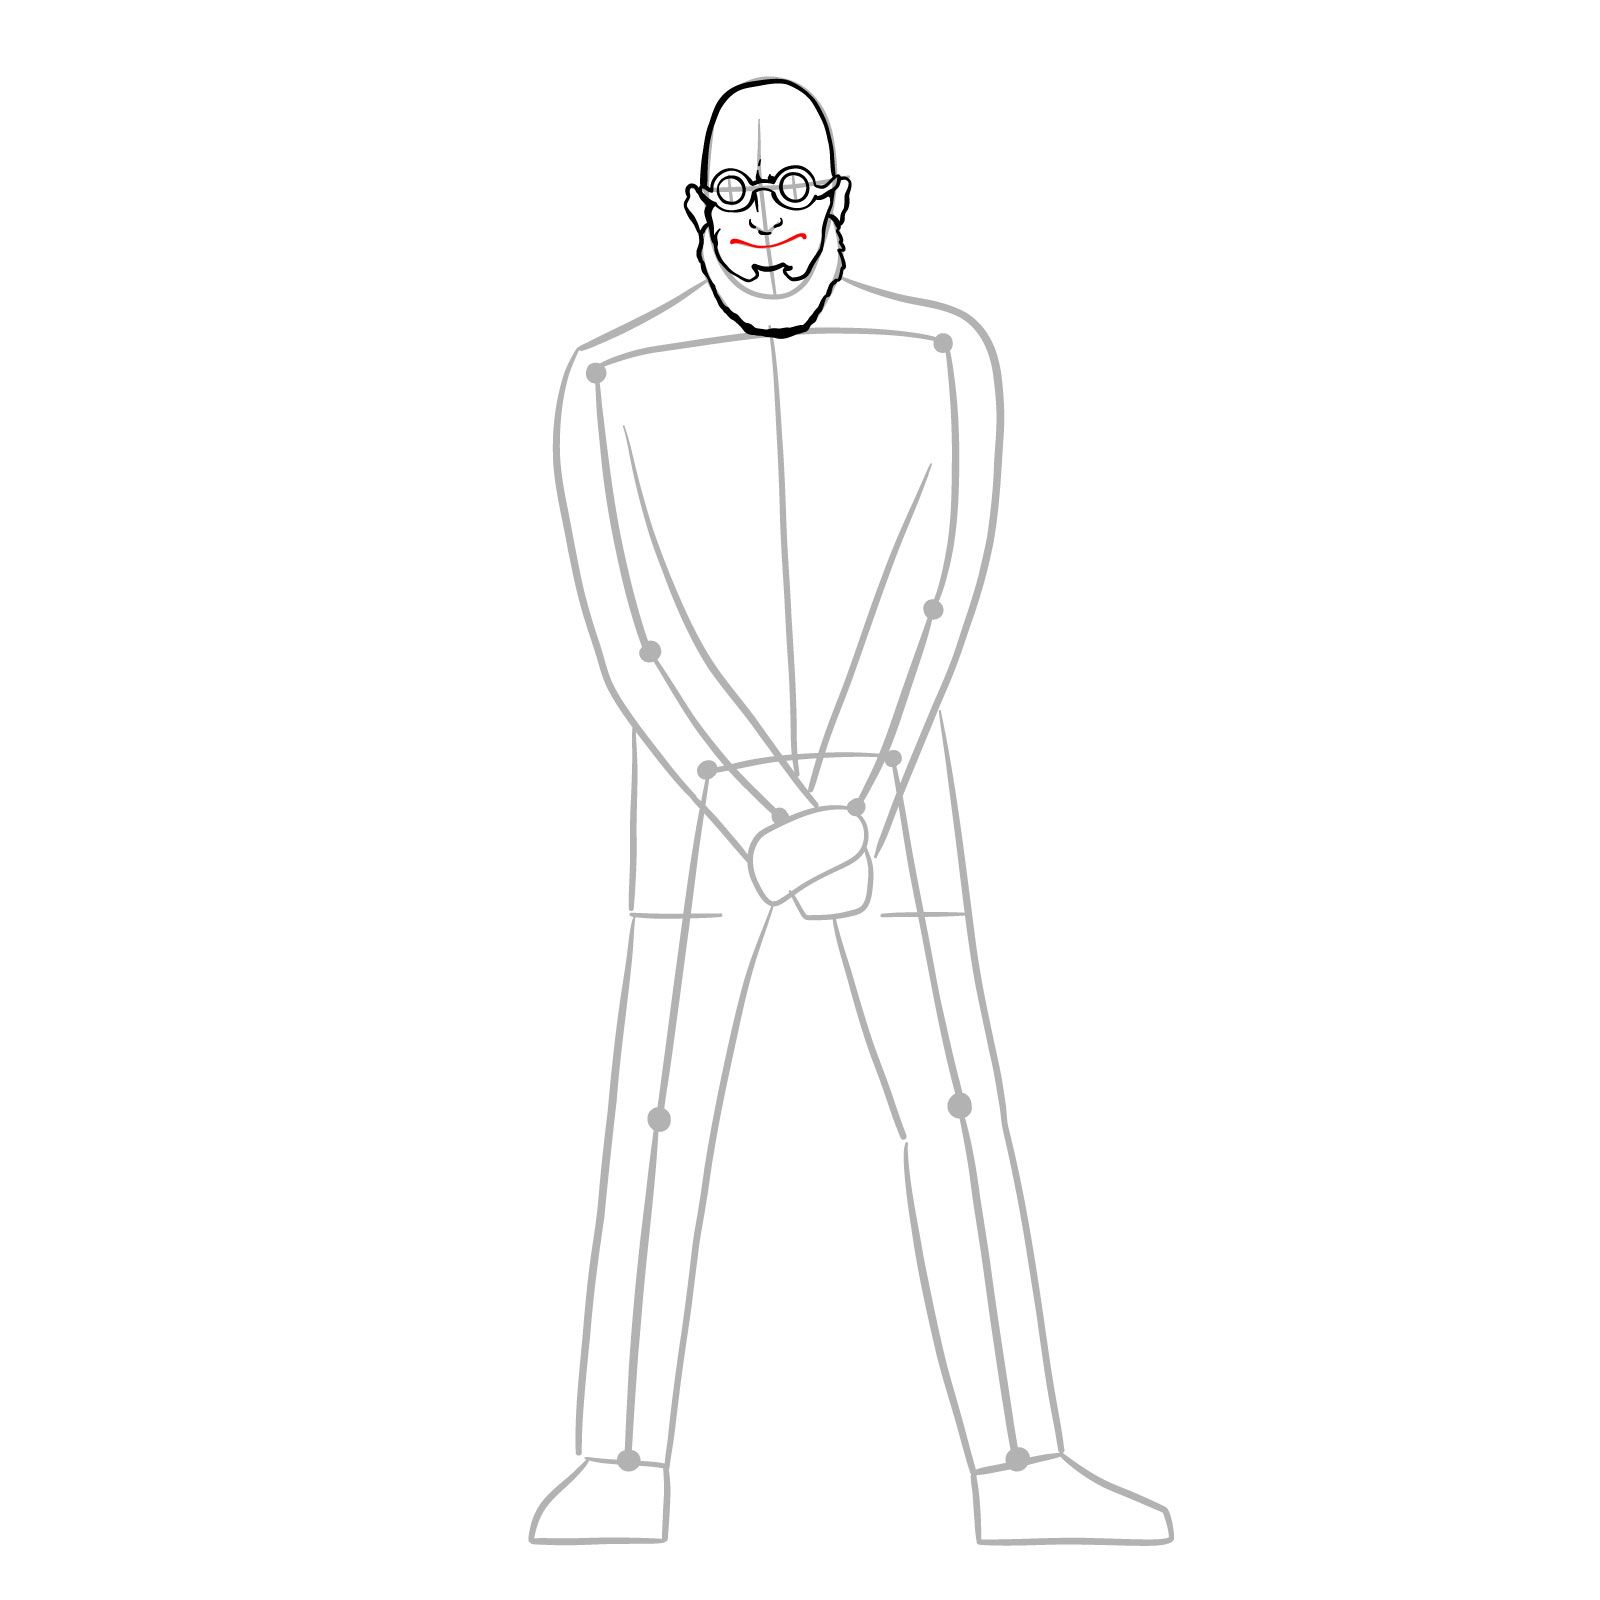 How to draw Dr. Hugo Strange from DC Comics - step 11